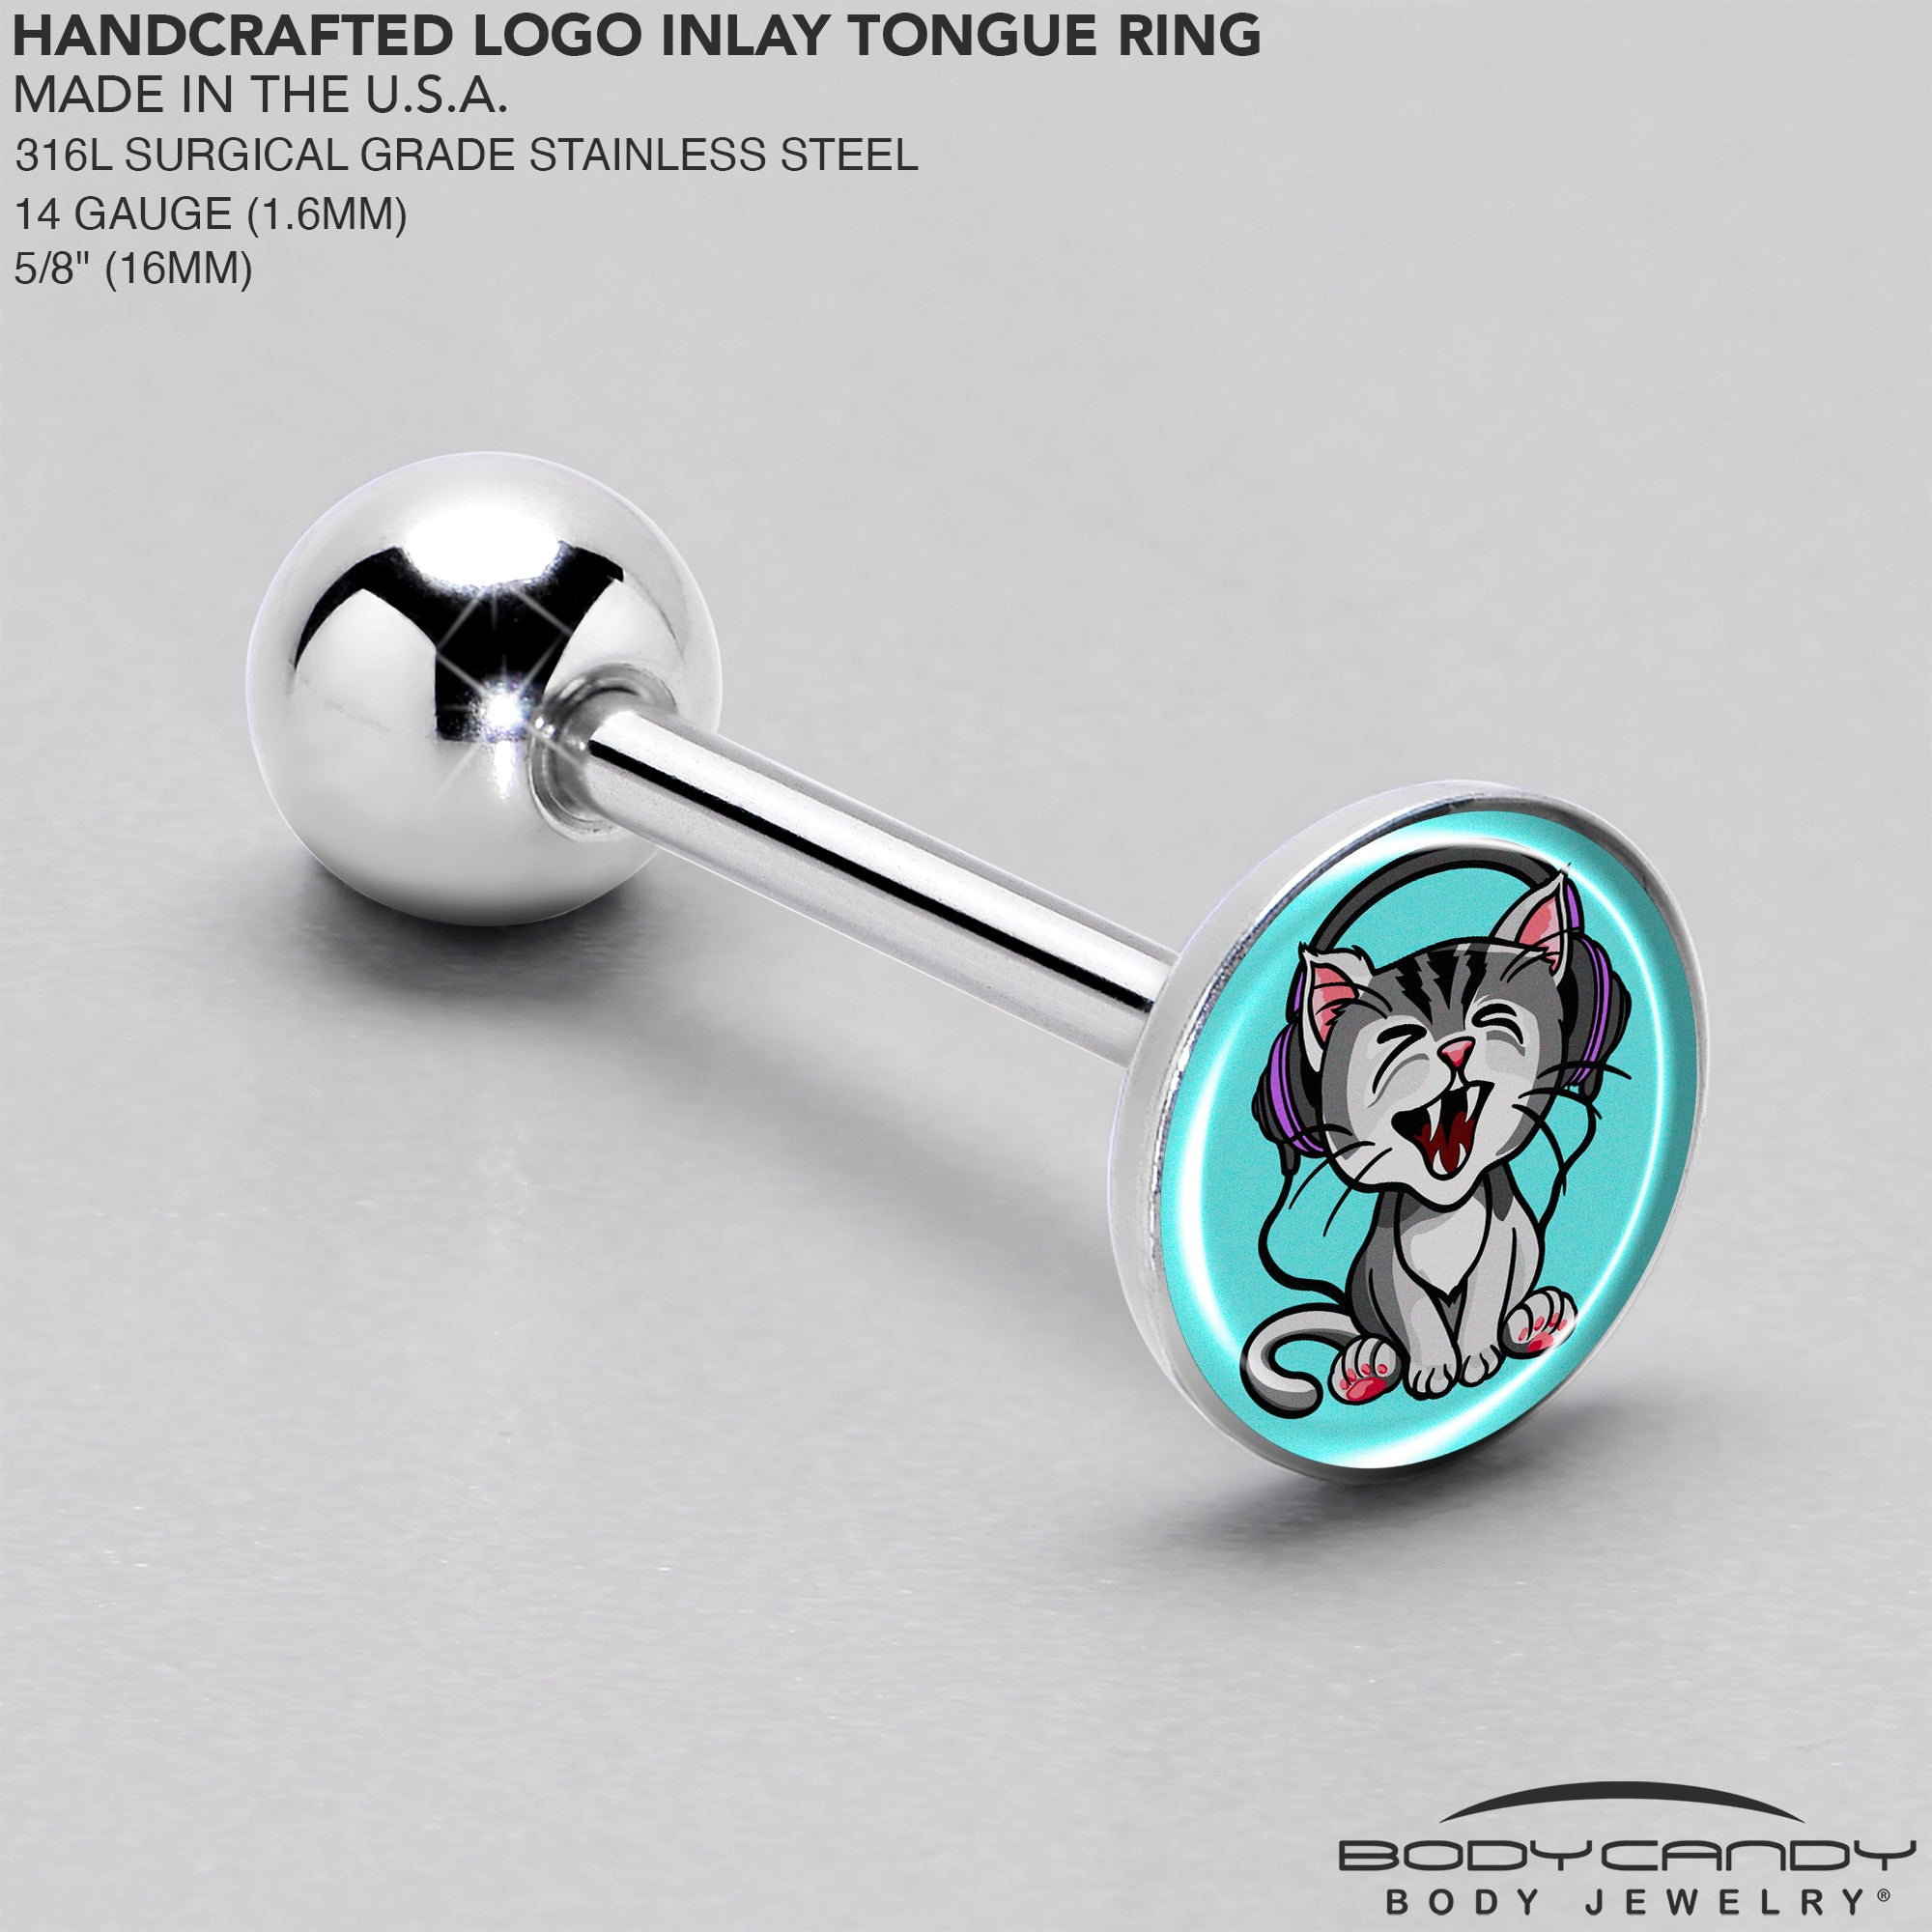 Heavy Metal Kitty Cat Barbell Tongue Ring